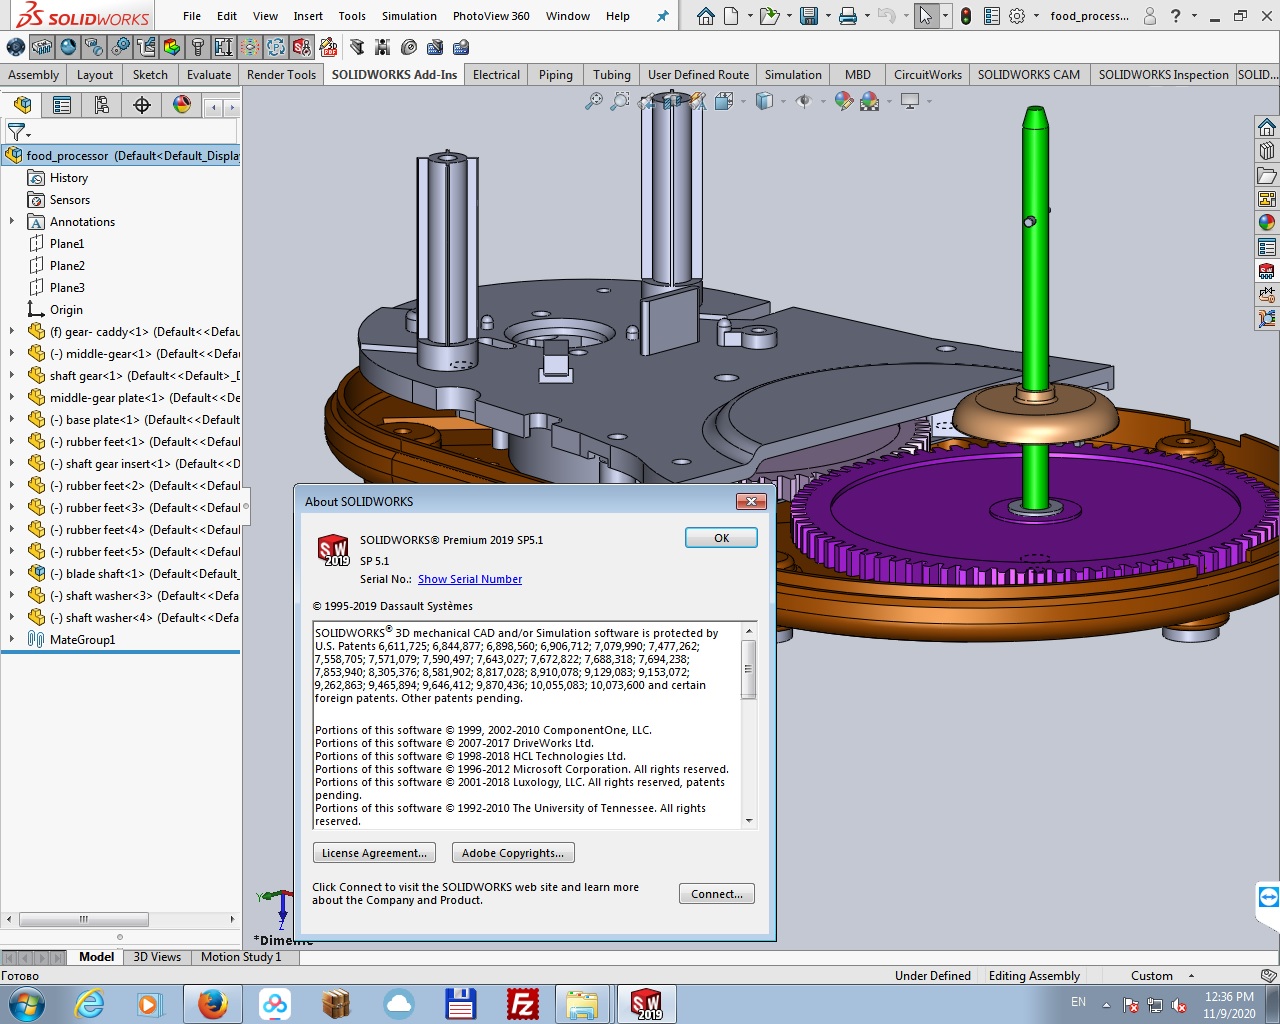 Working with SolidWorks 2019 SP5.1 Full license